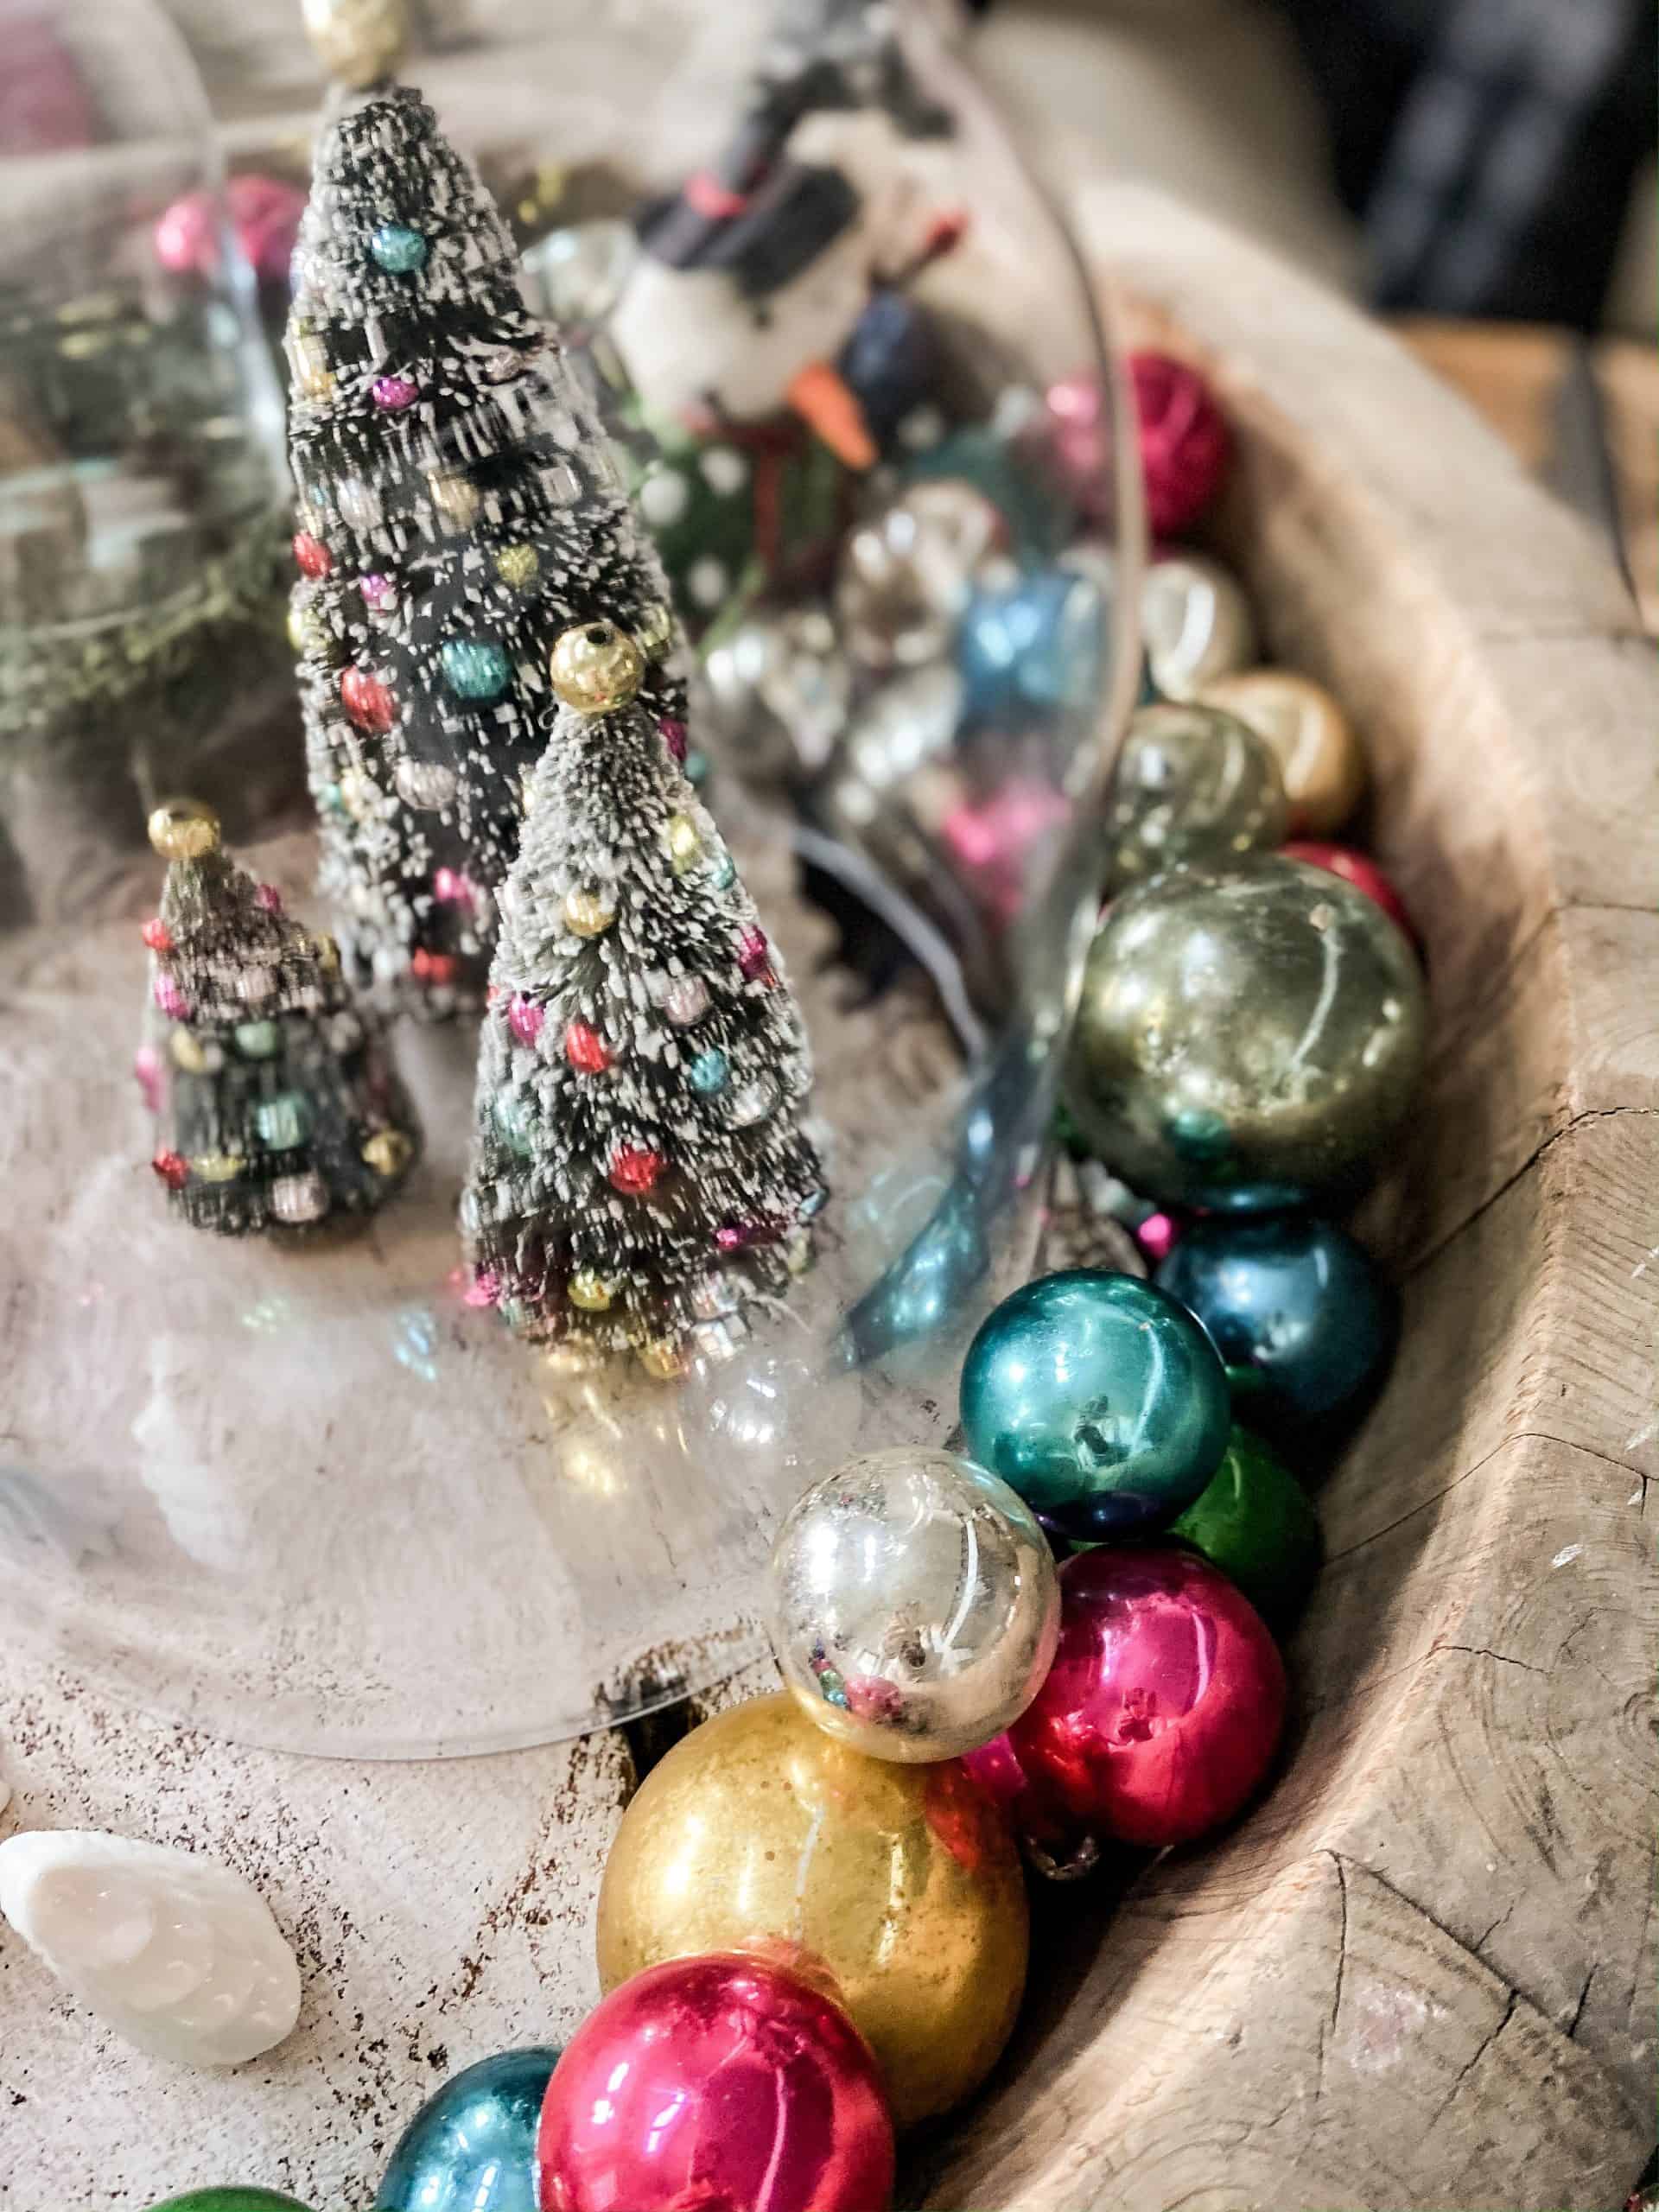 How to Repurpose Old Christmas Décor